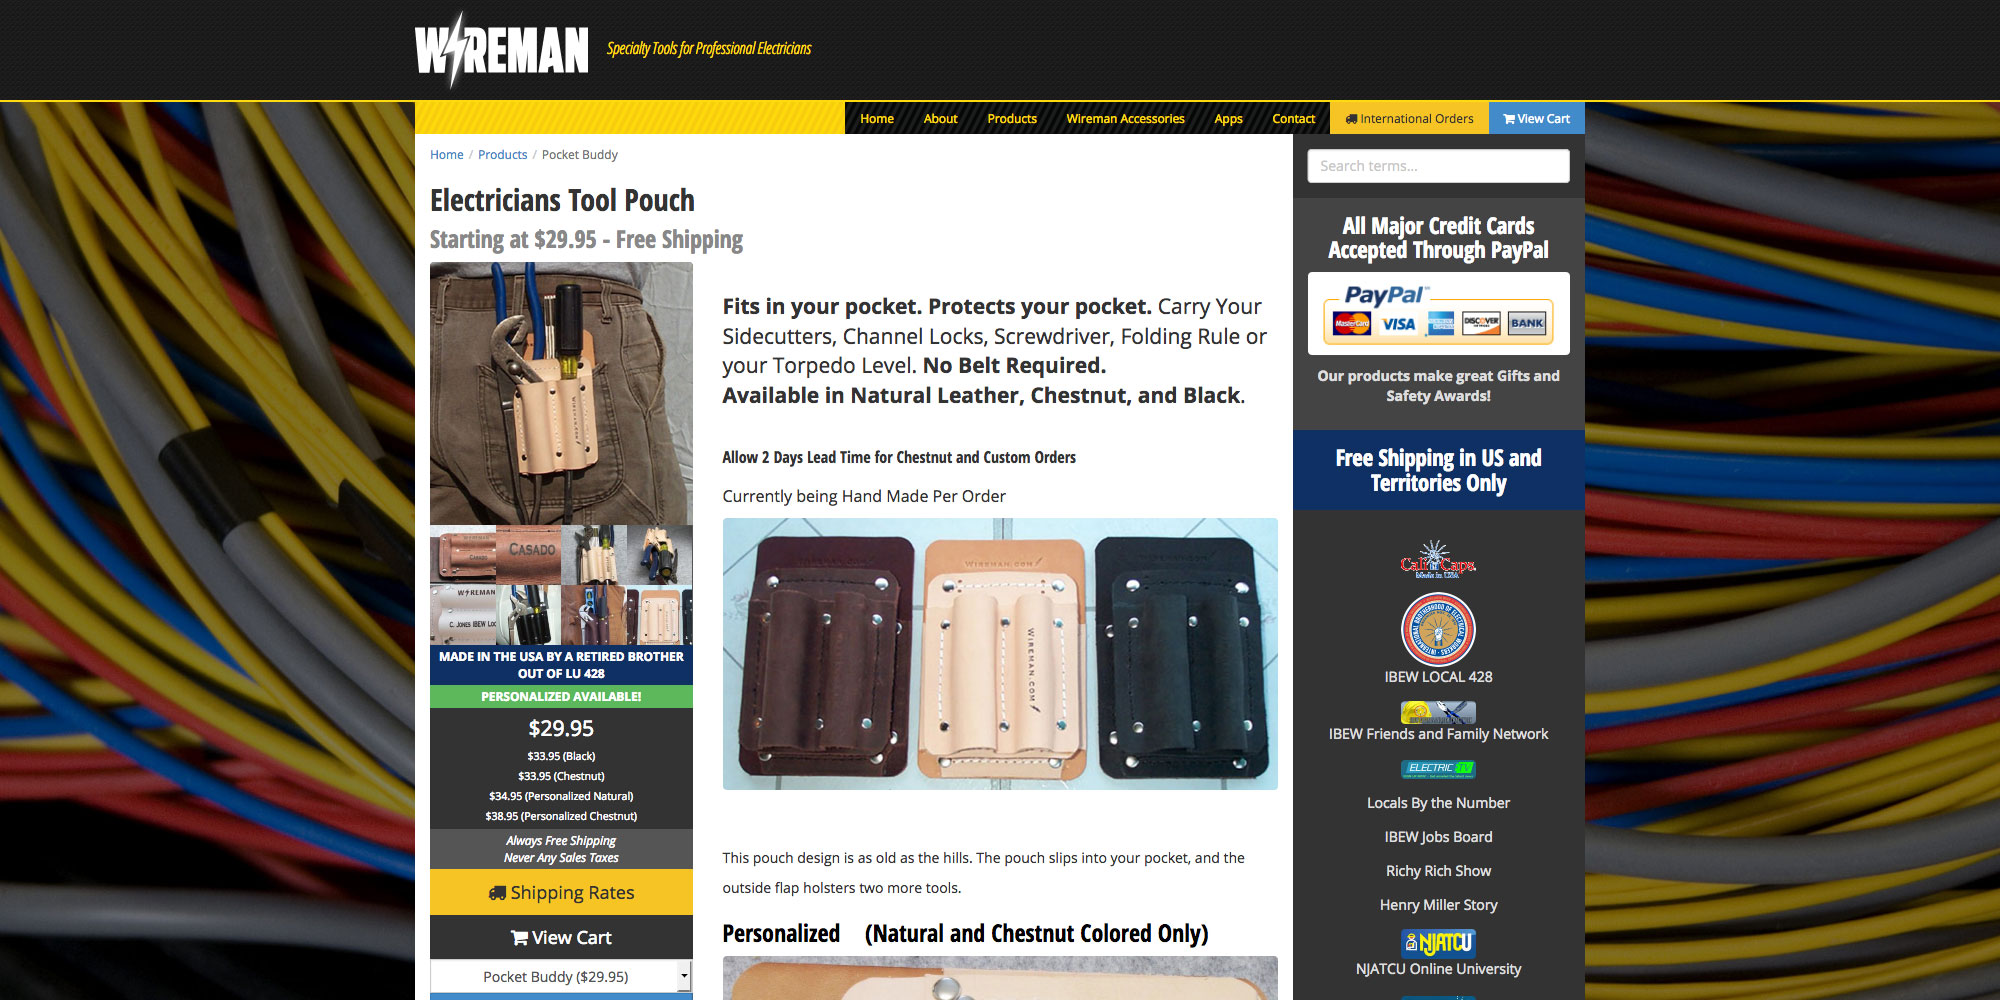 A Wireman.com product page